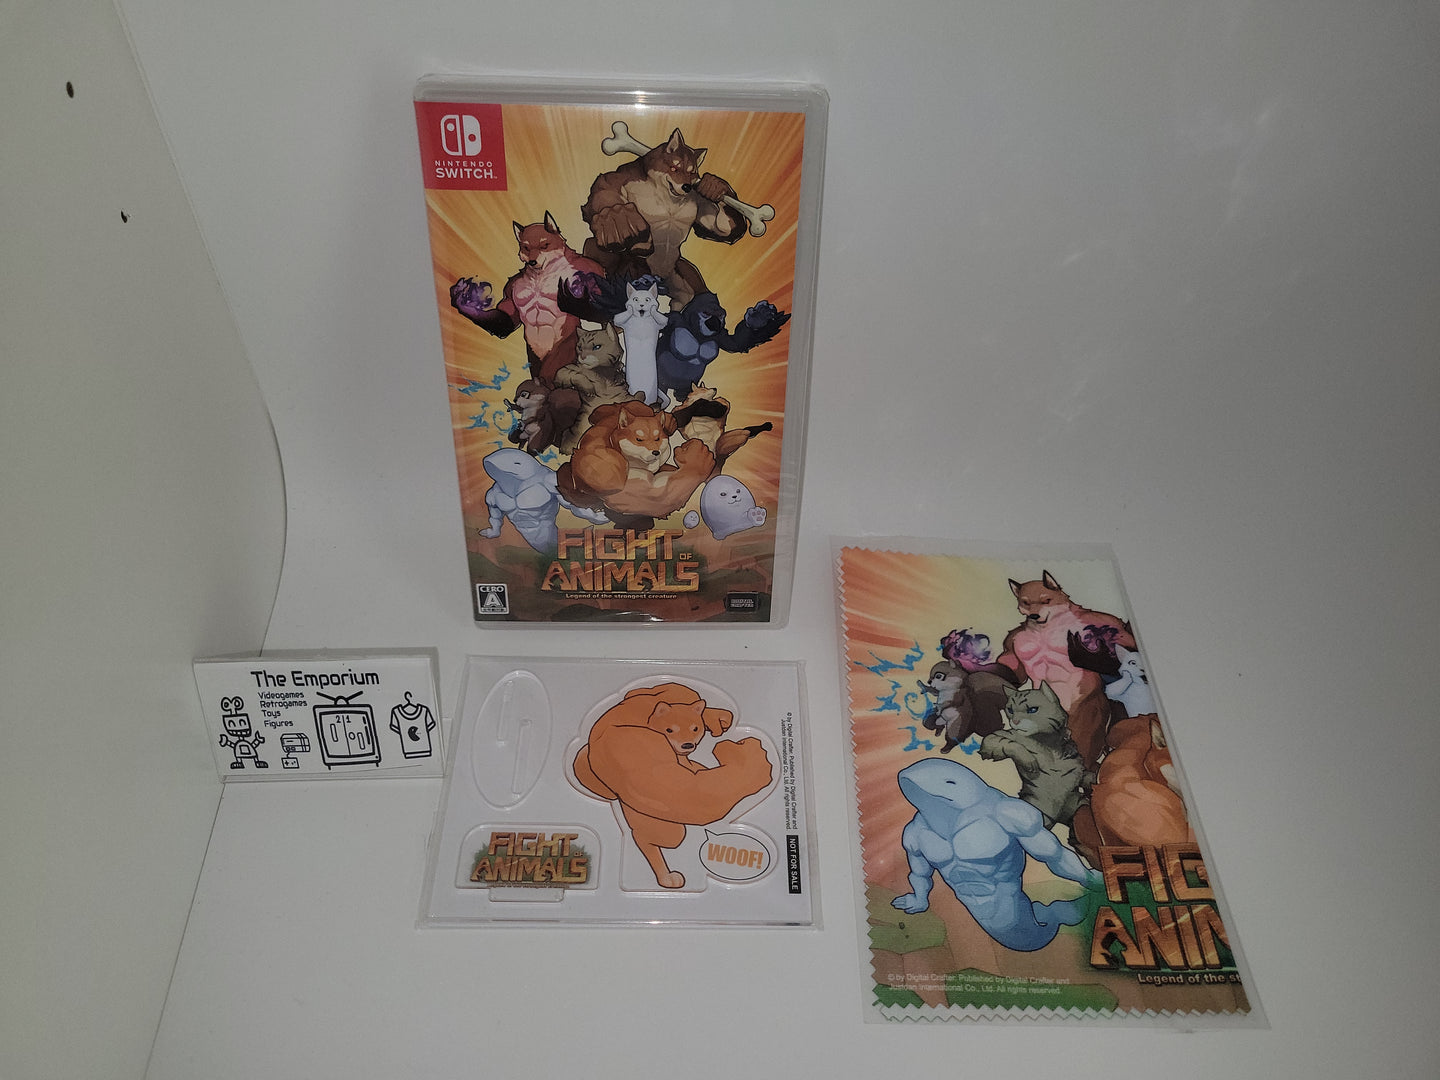 Fight of Animals (first print limited) - Nintendo Switch NSW